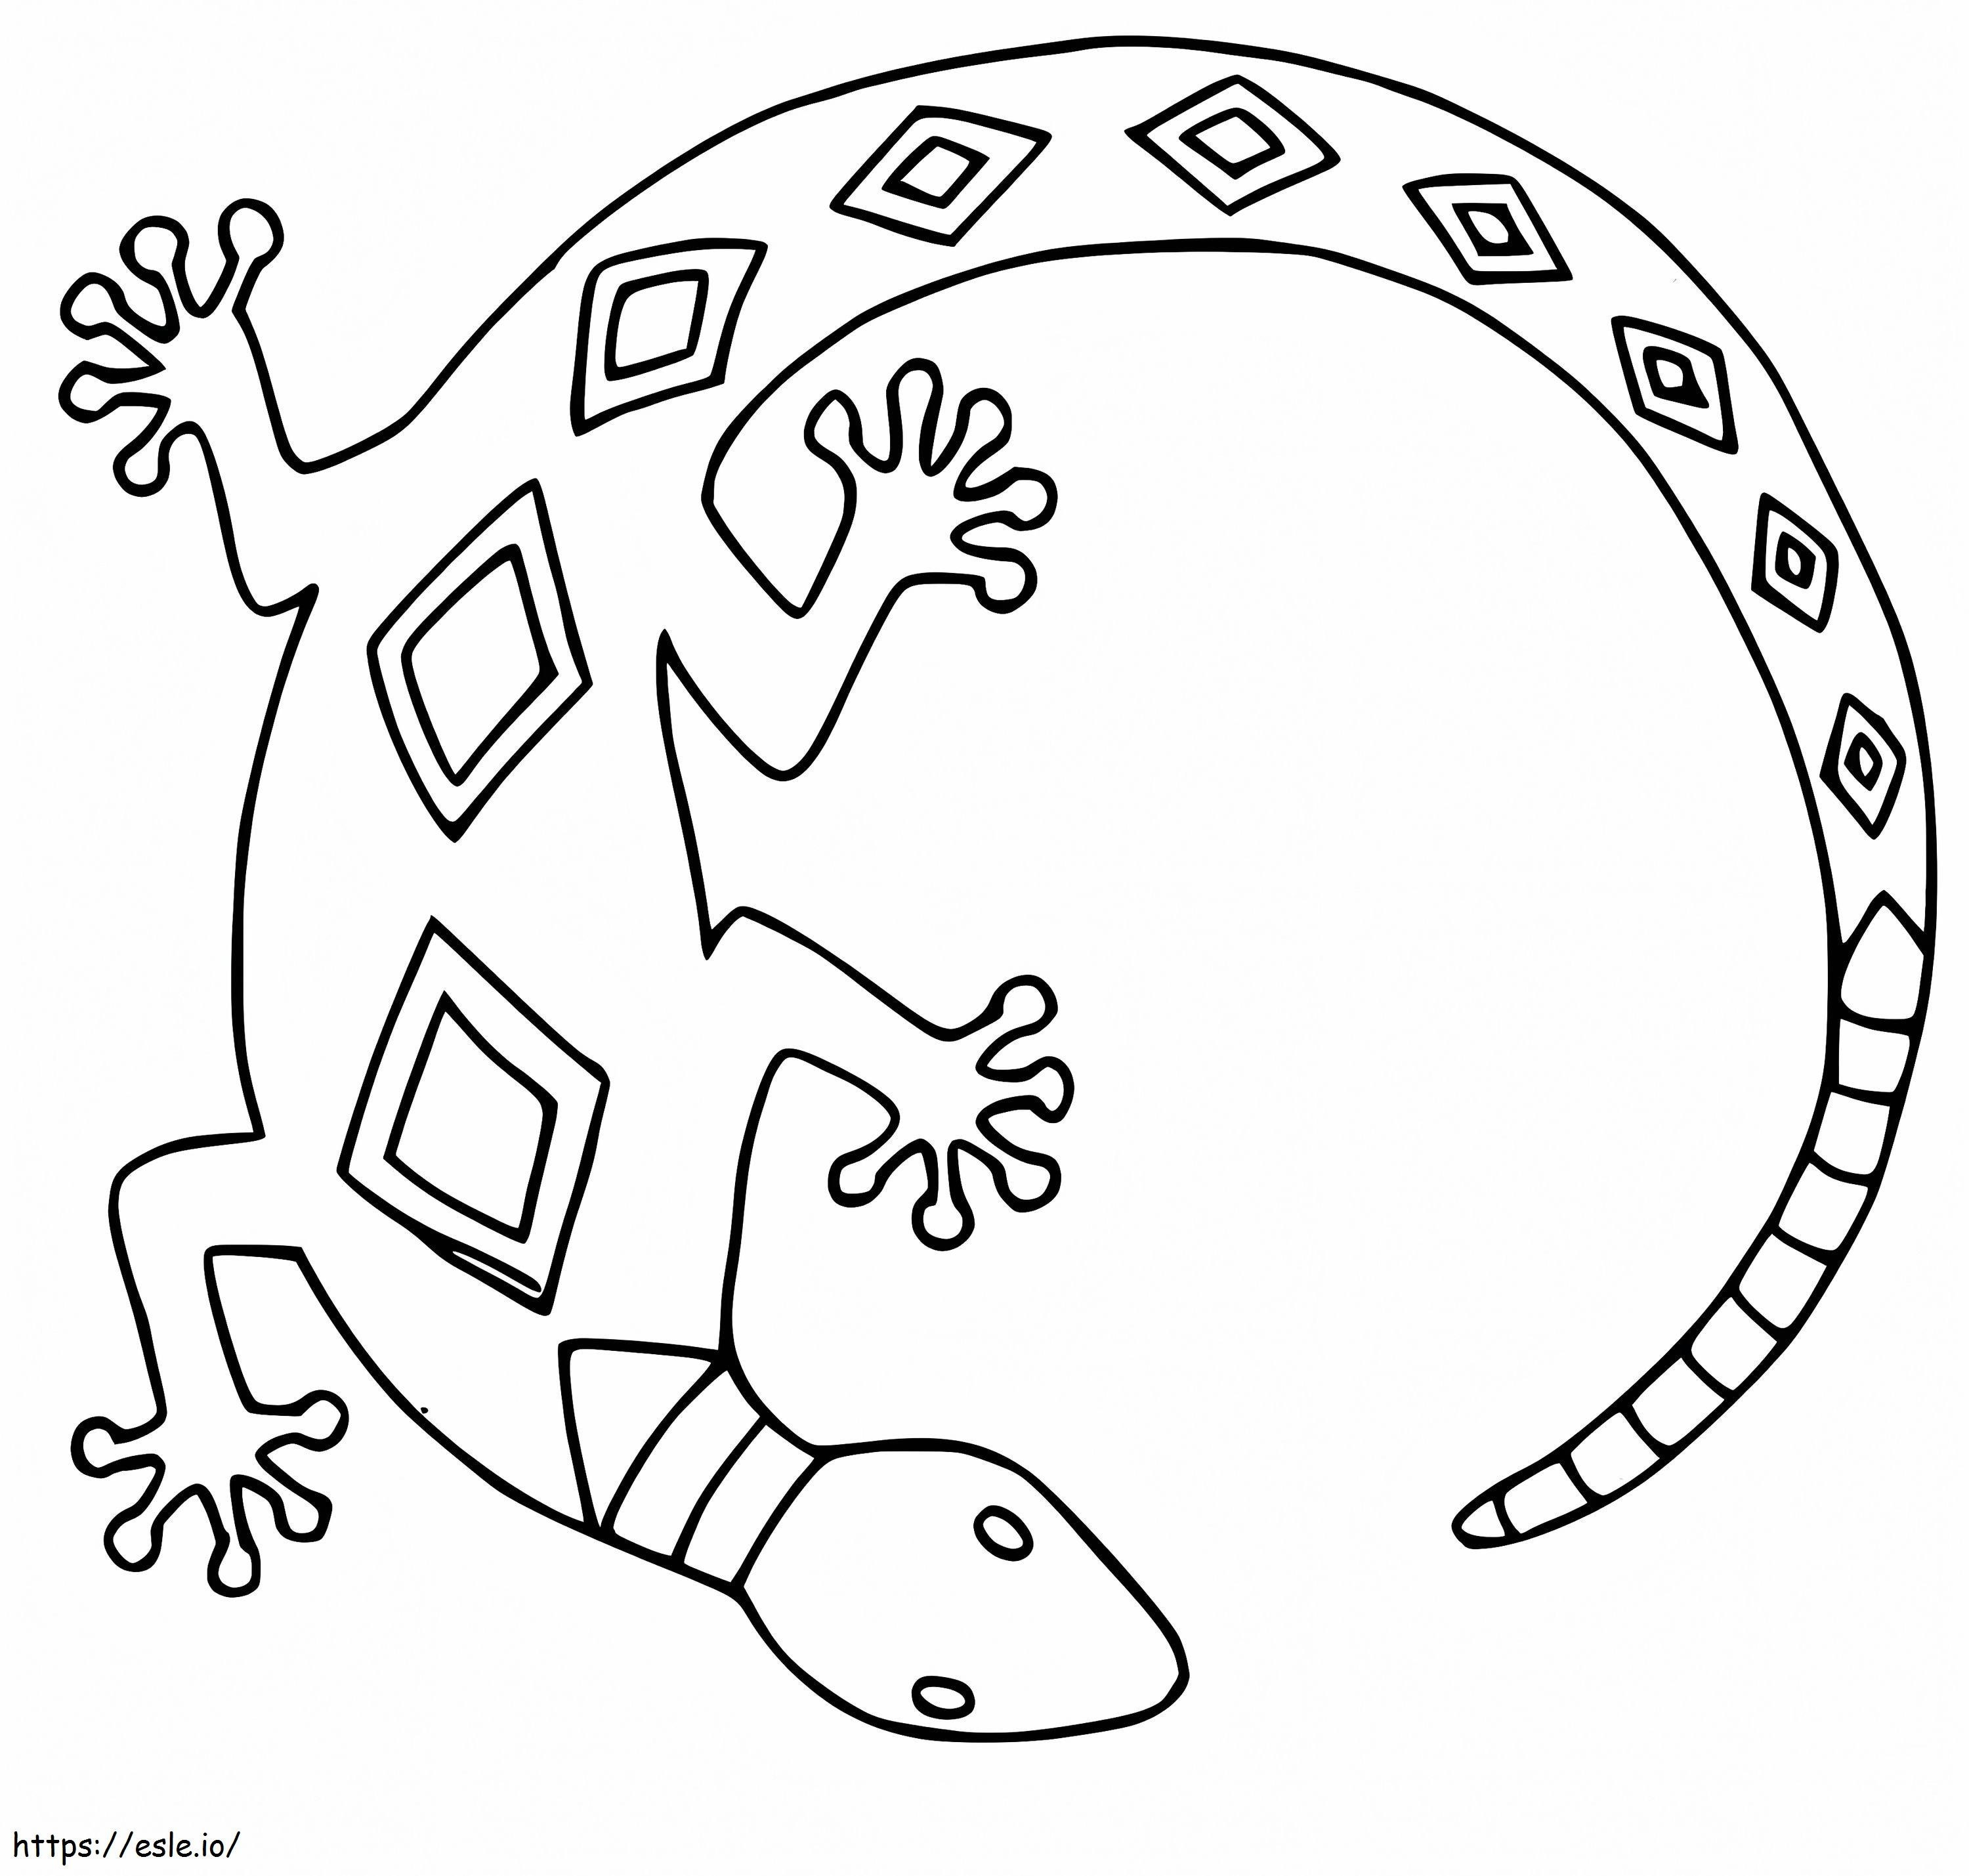 Newt 2 coloring page